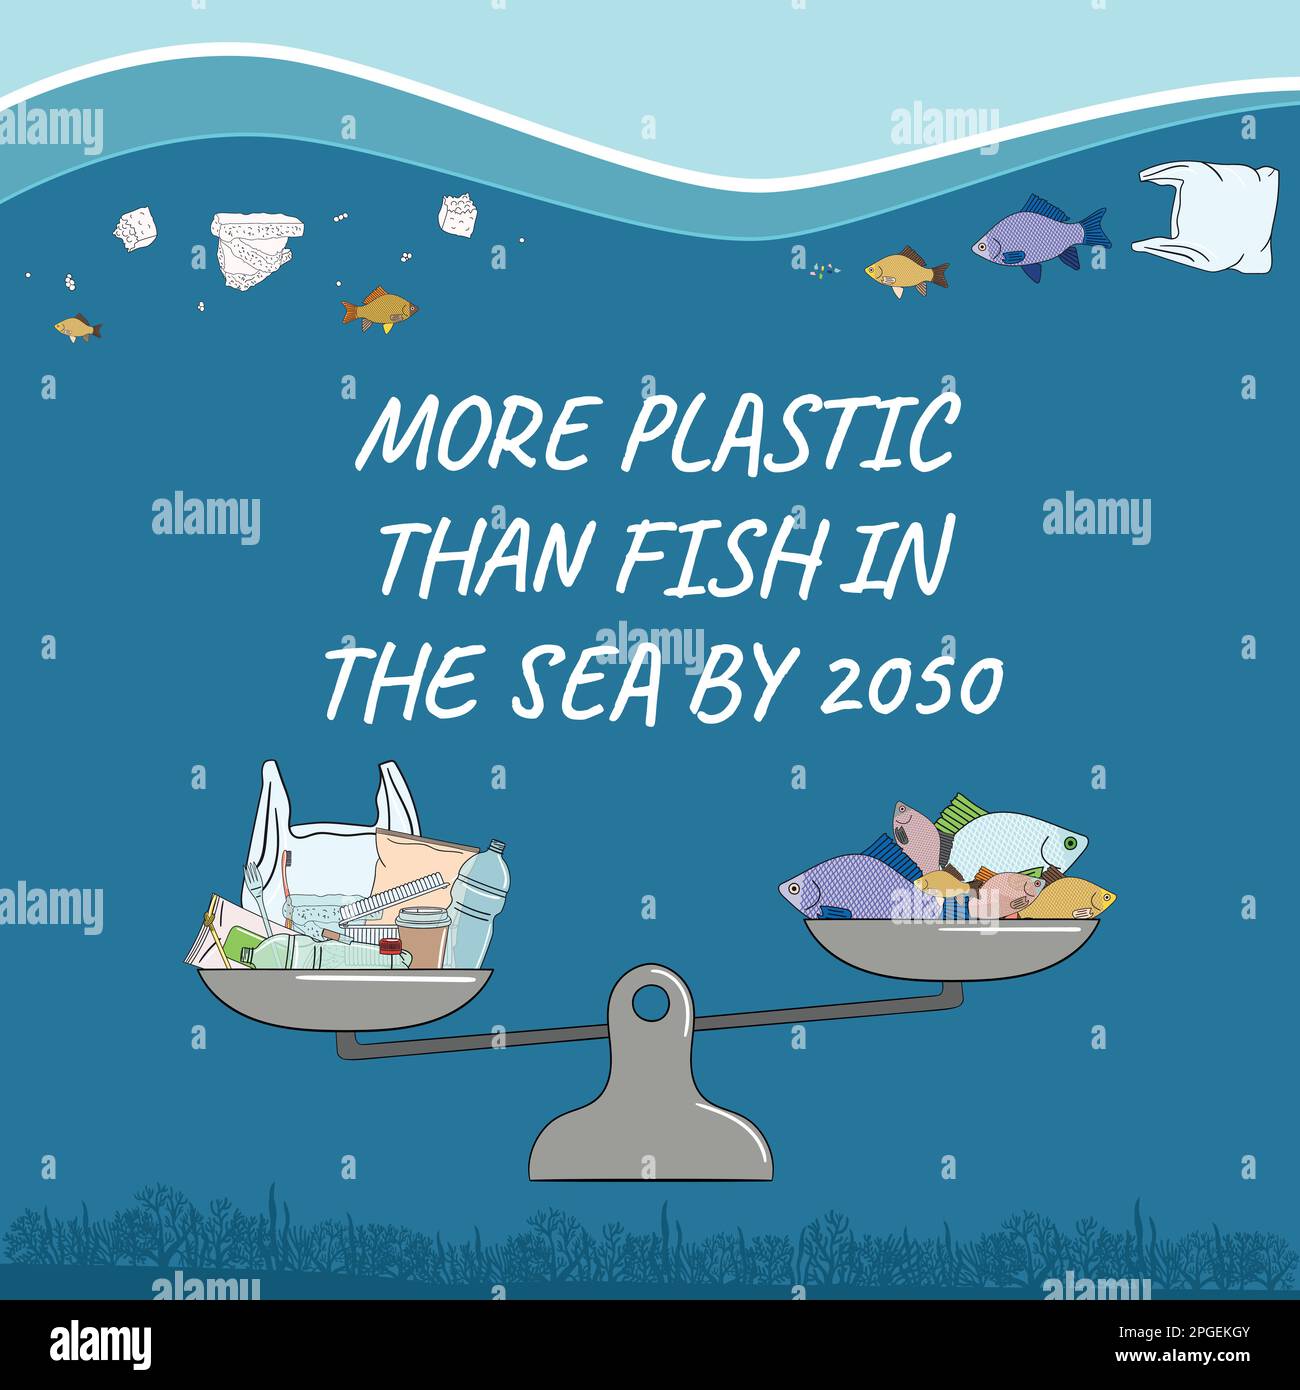 More plastic than fish in the sea by 2050 on balance scale. Marine and ocean plastic pollution. Global environmental problems. Stop water pollution. N Stock Vector